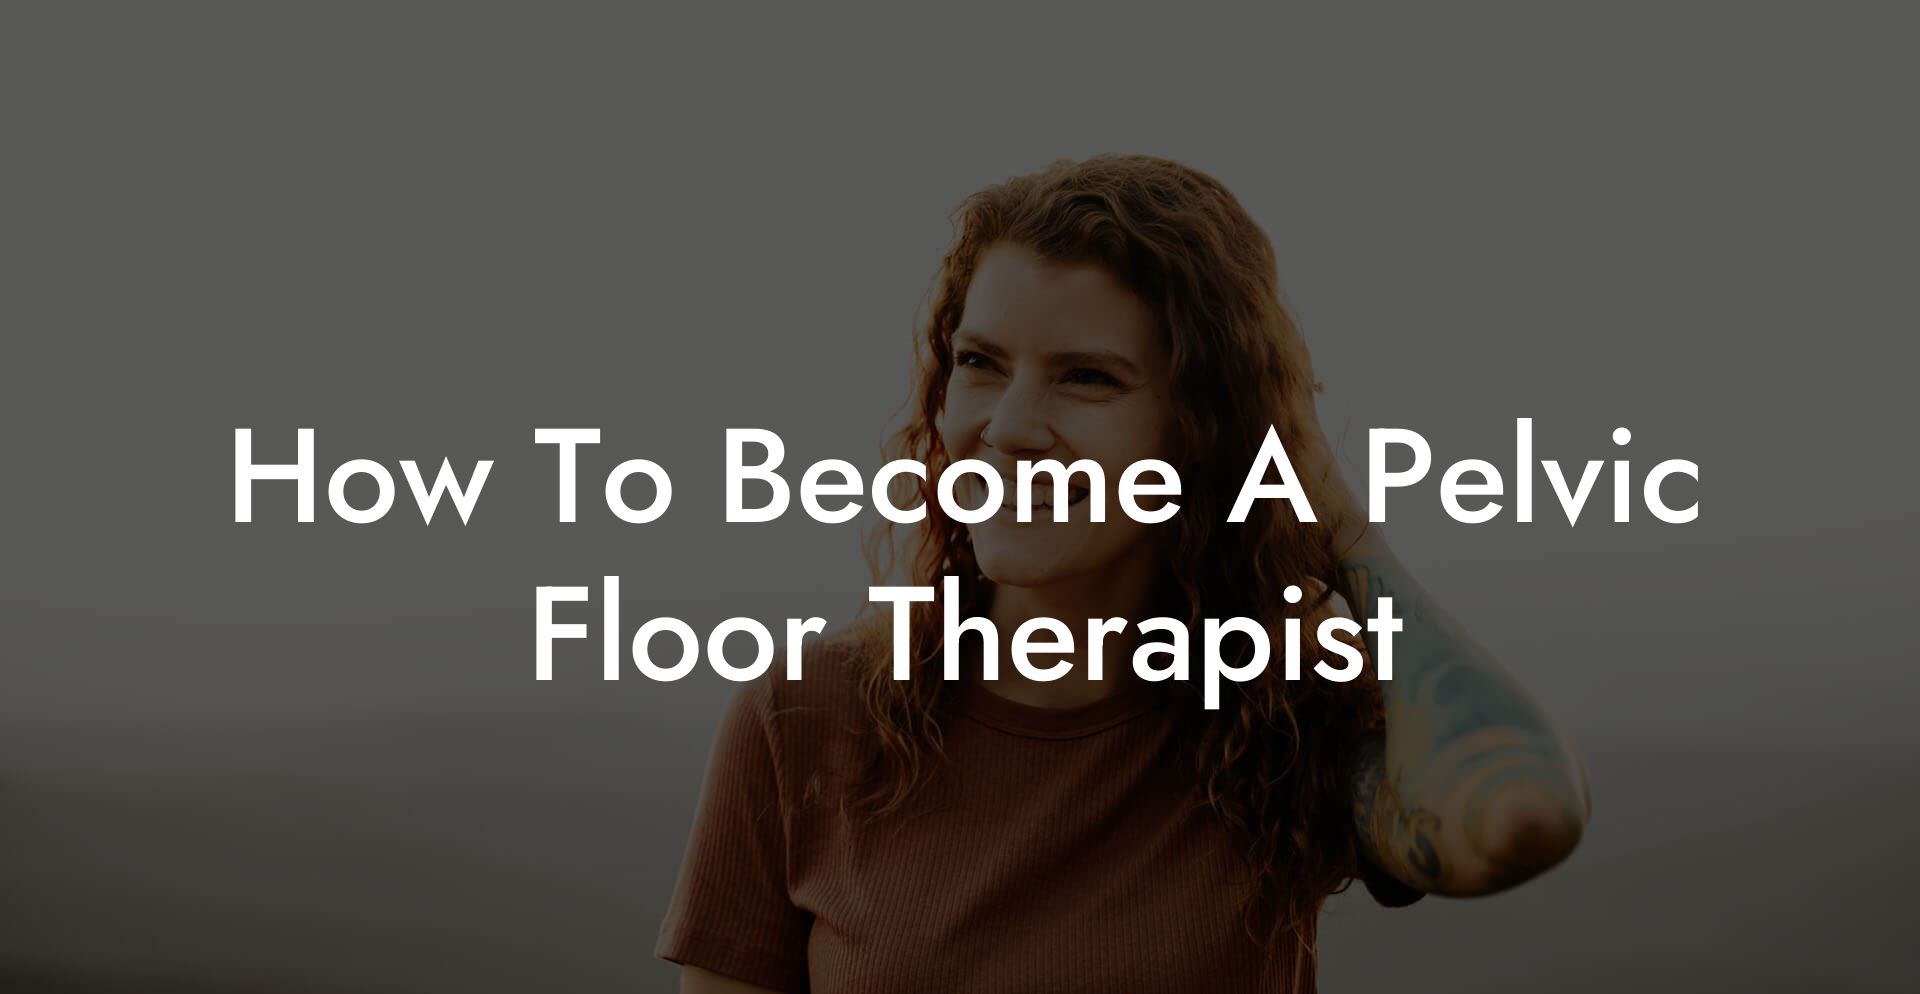 How To Become A Pelvic Floor Therapist